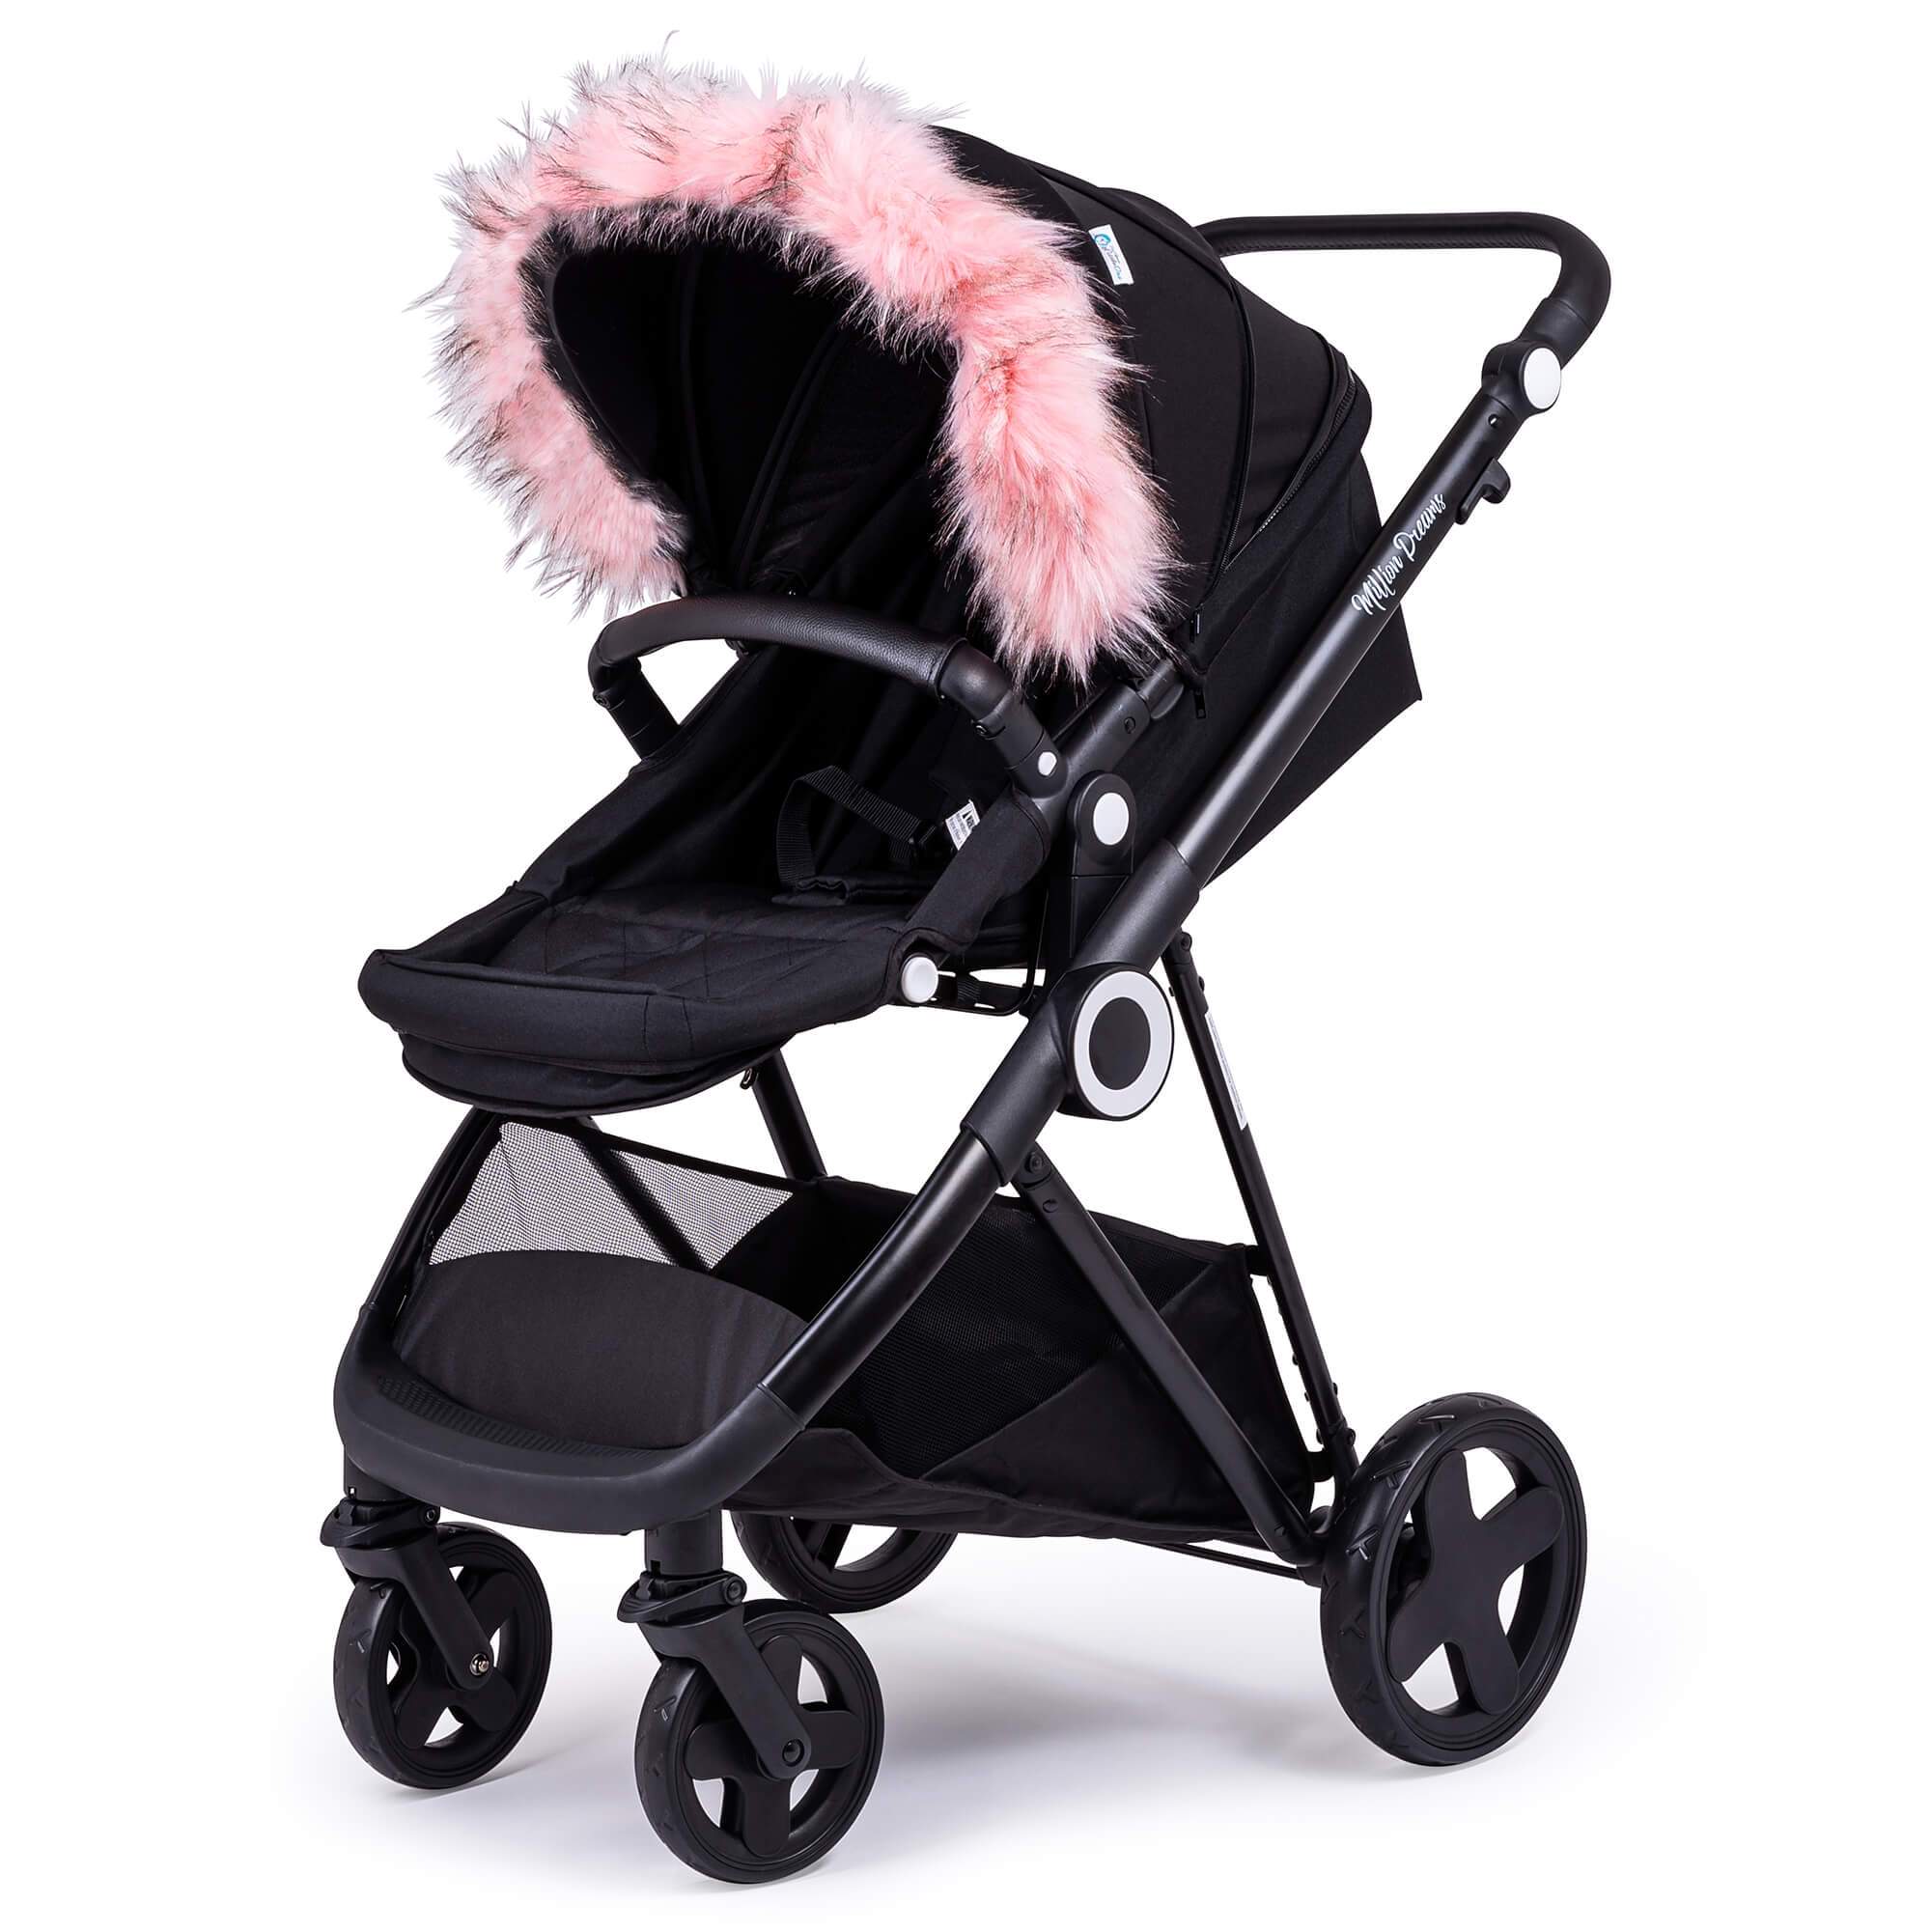 Pram Fur Hood Trim Attachment for Pushchair Compatible with BabyDan - Light Pink / Fits All Models | For Your Little One